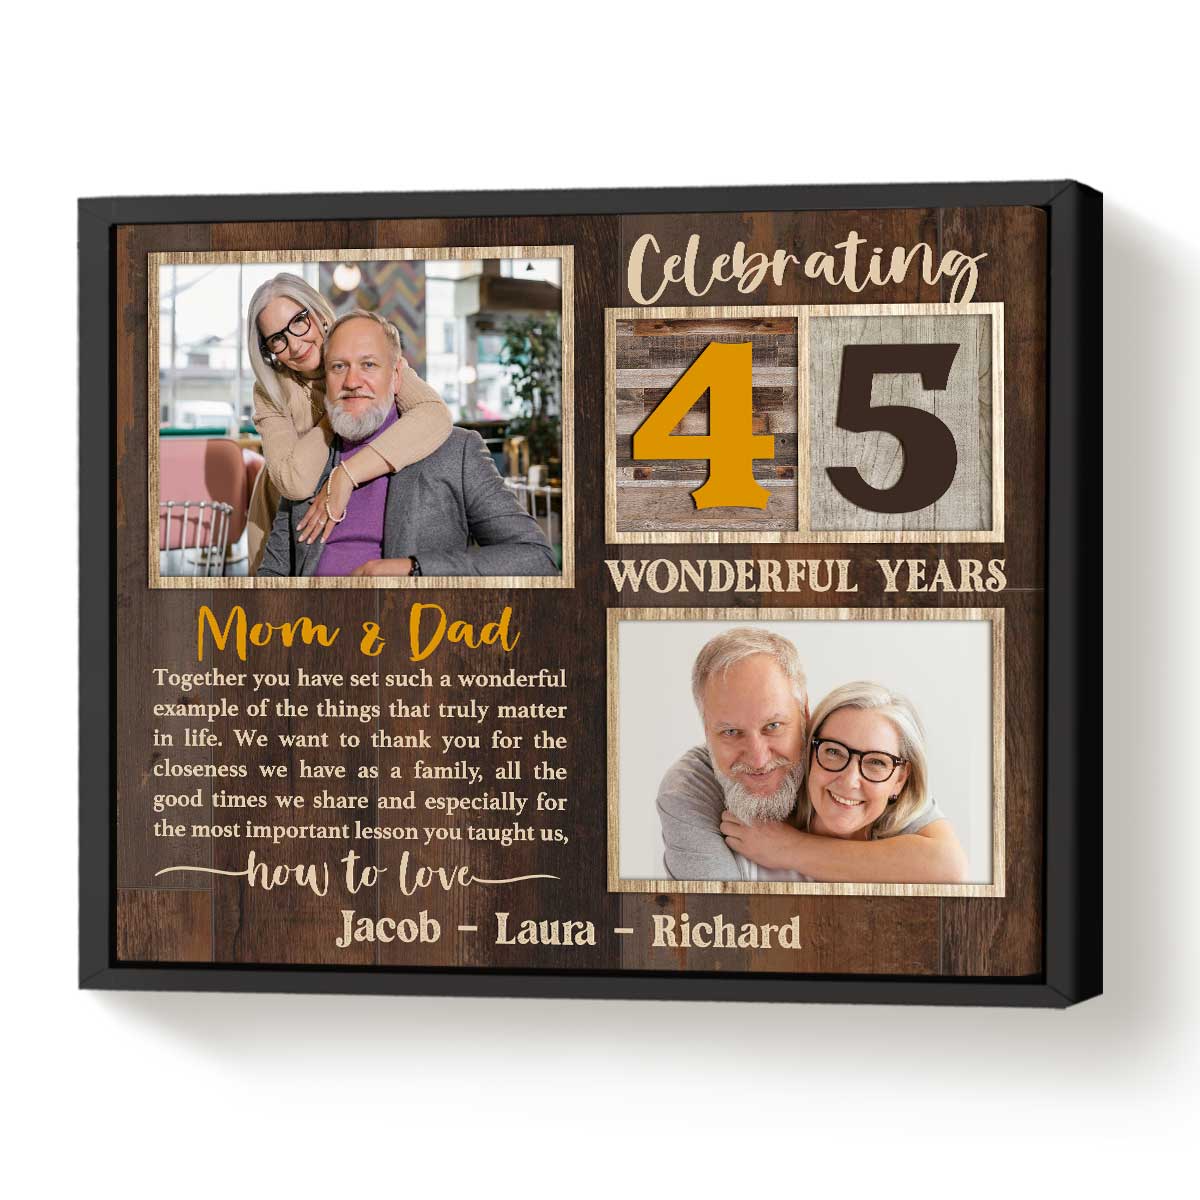 Wedding Anniversary Gifts For Parents - Gifting Ideas For Mom & Dad - Zwende